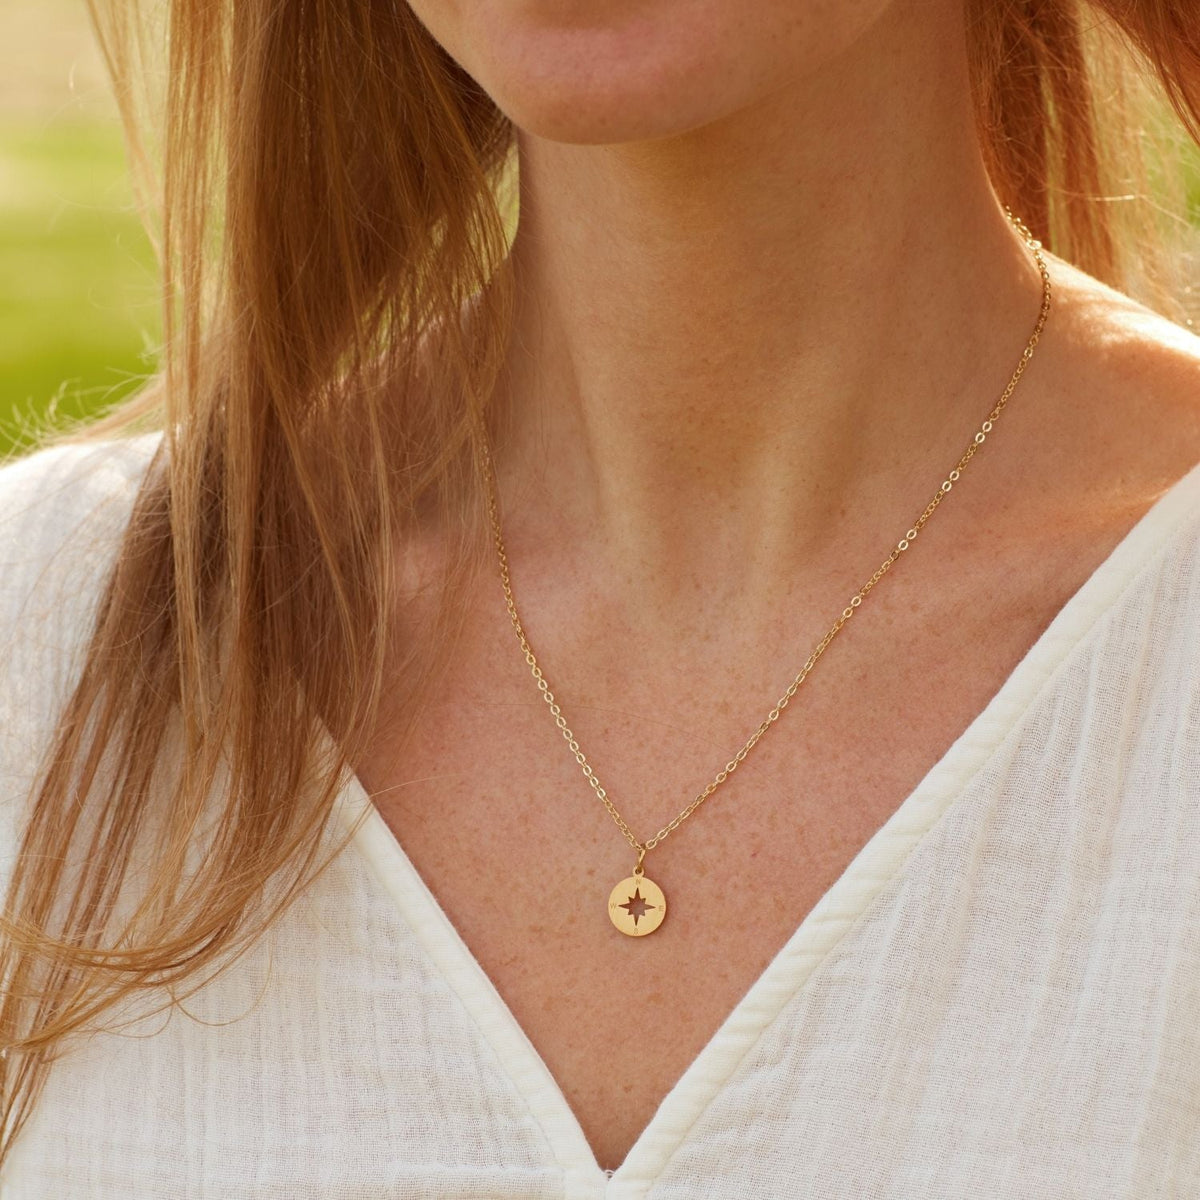 To the Mother of the Bride (From Daughter) | Today a Bride, Tomorrow a Wife | Compass Necklace